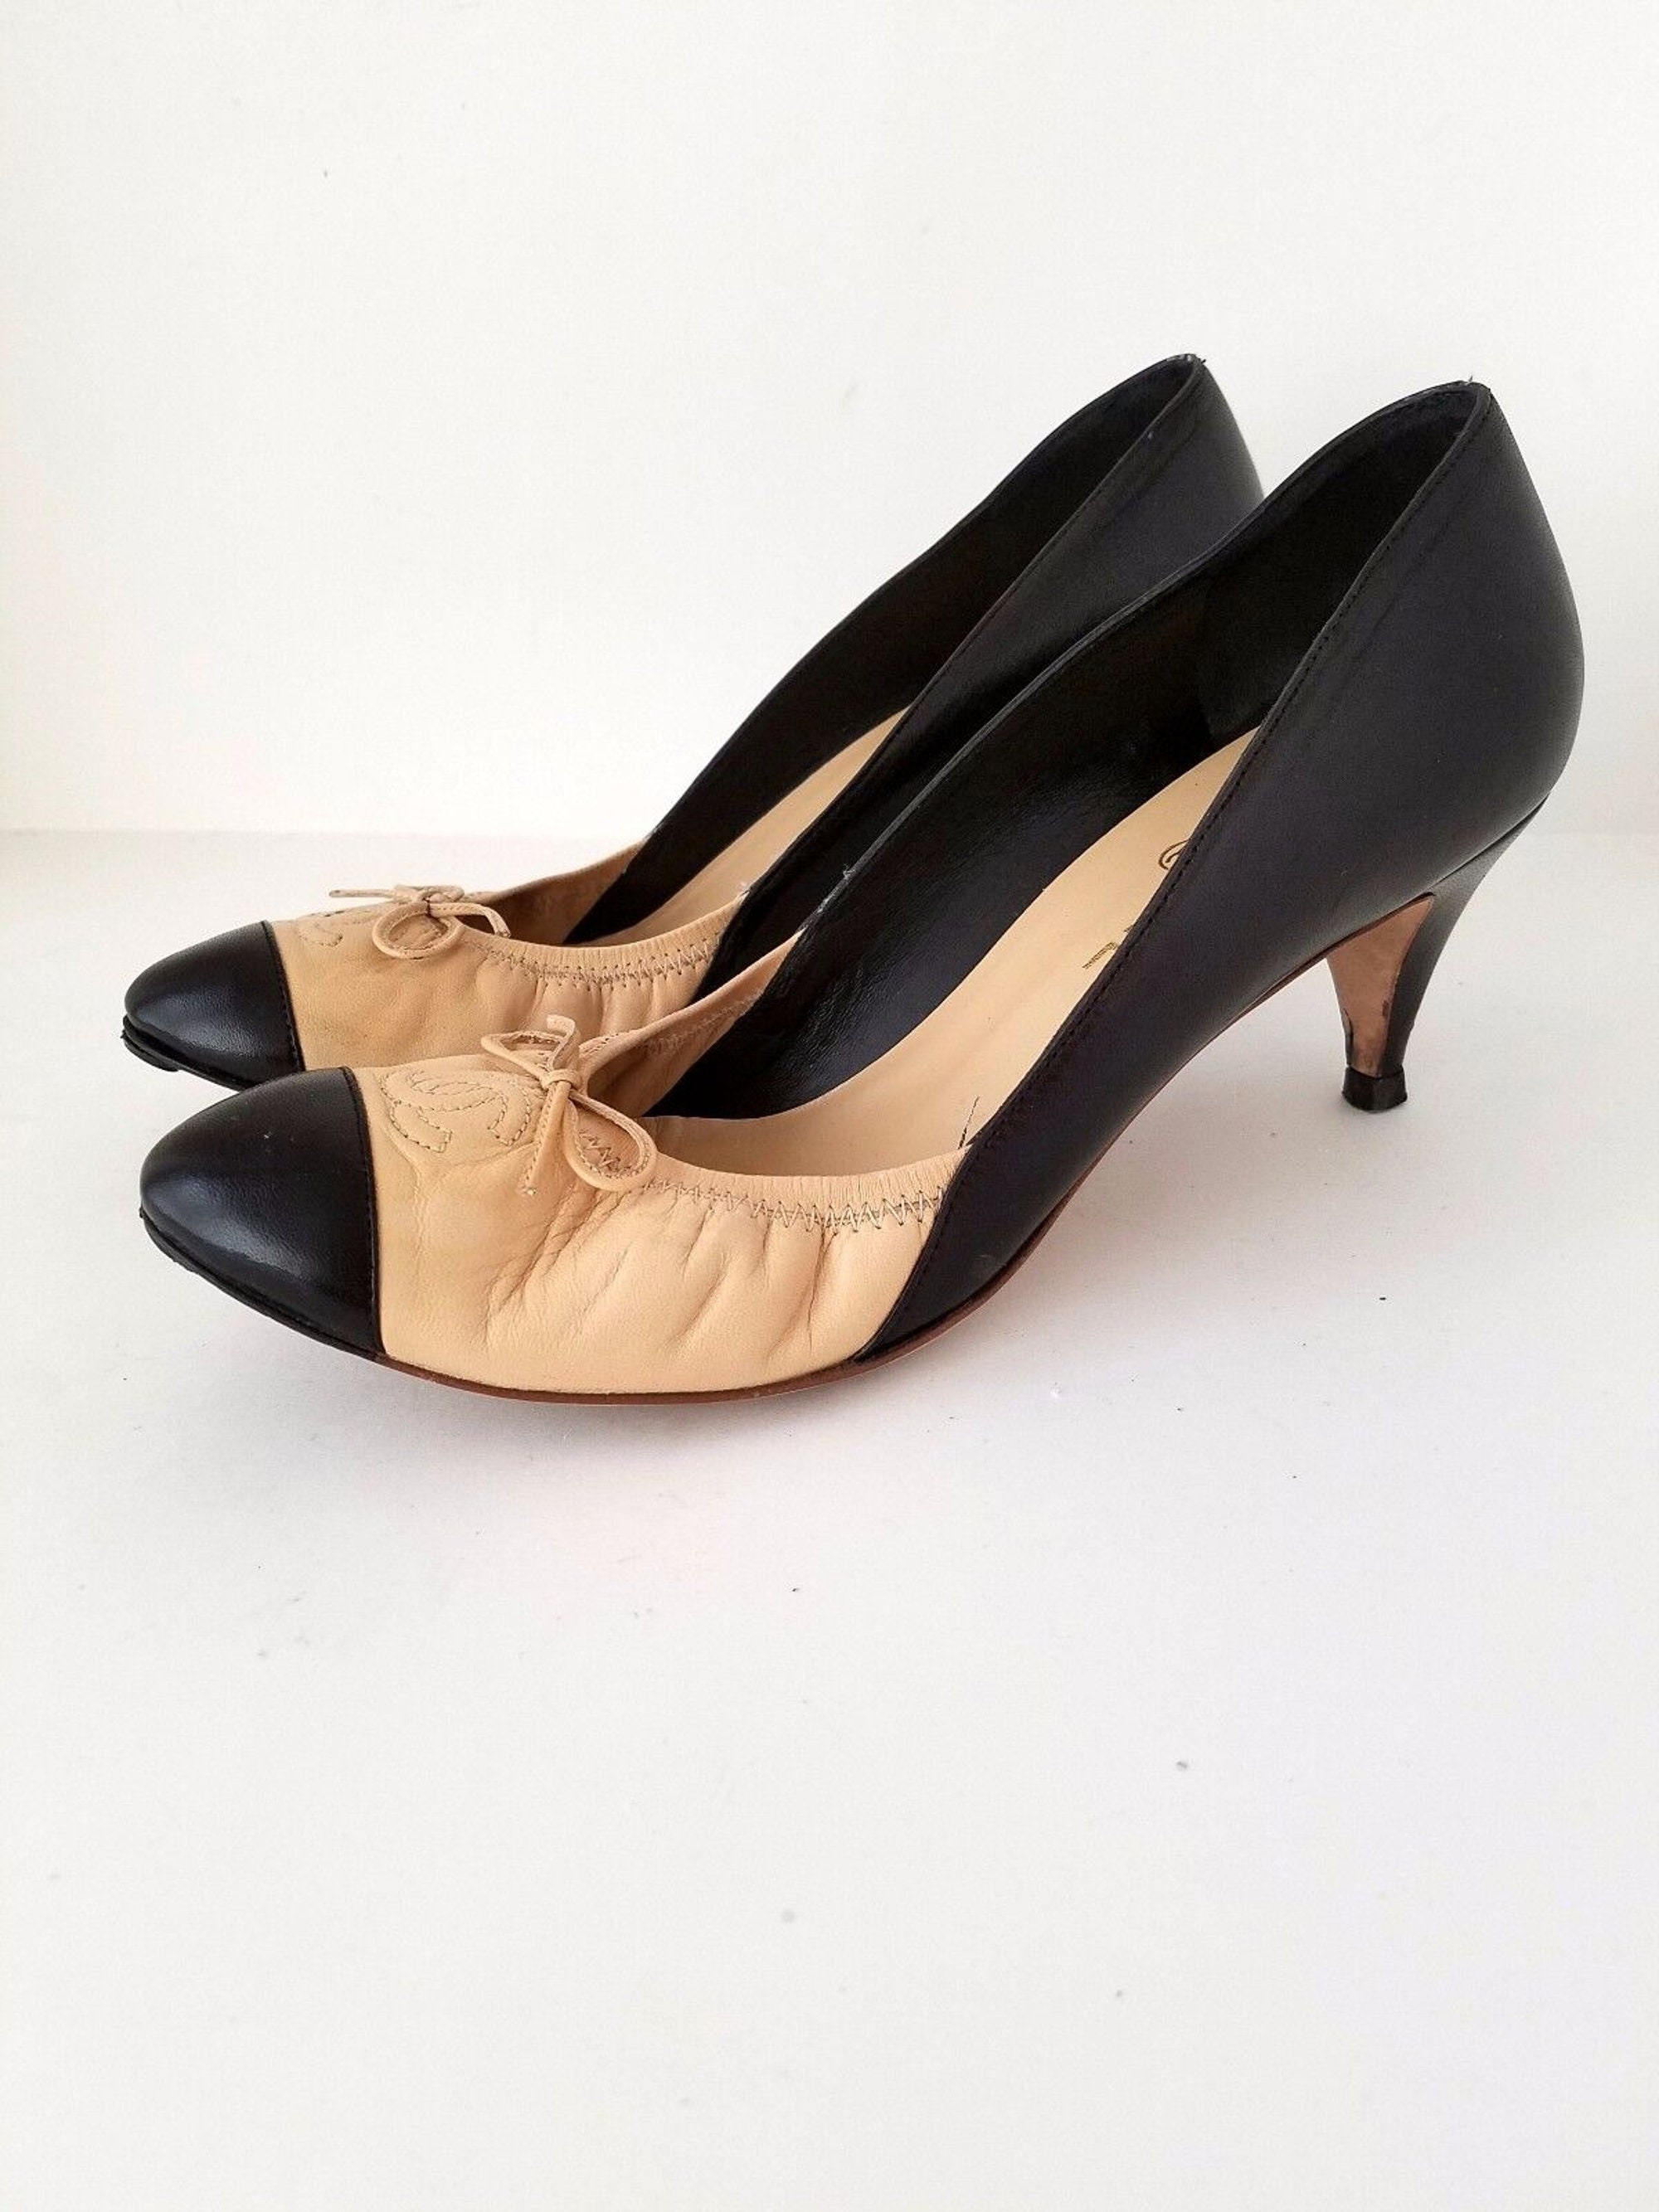 Chanel Chain T-Strap Pointed Toe Cut-Out Pumps 38.5 Black Leather Vintage